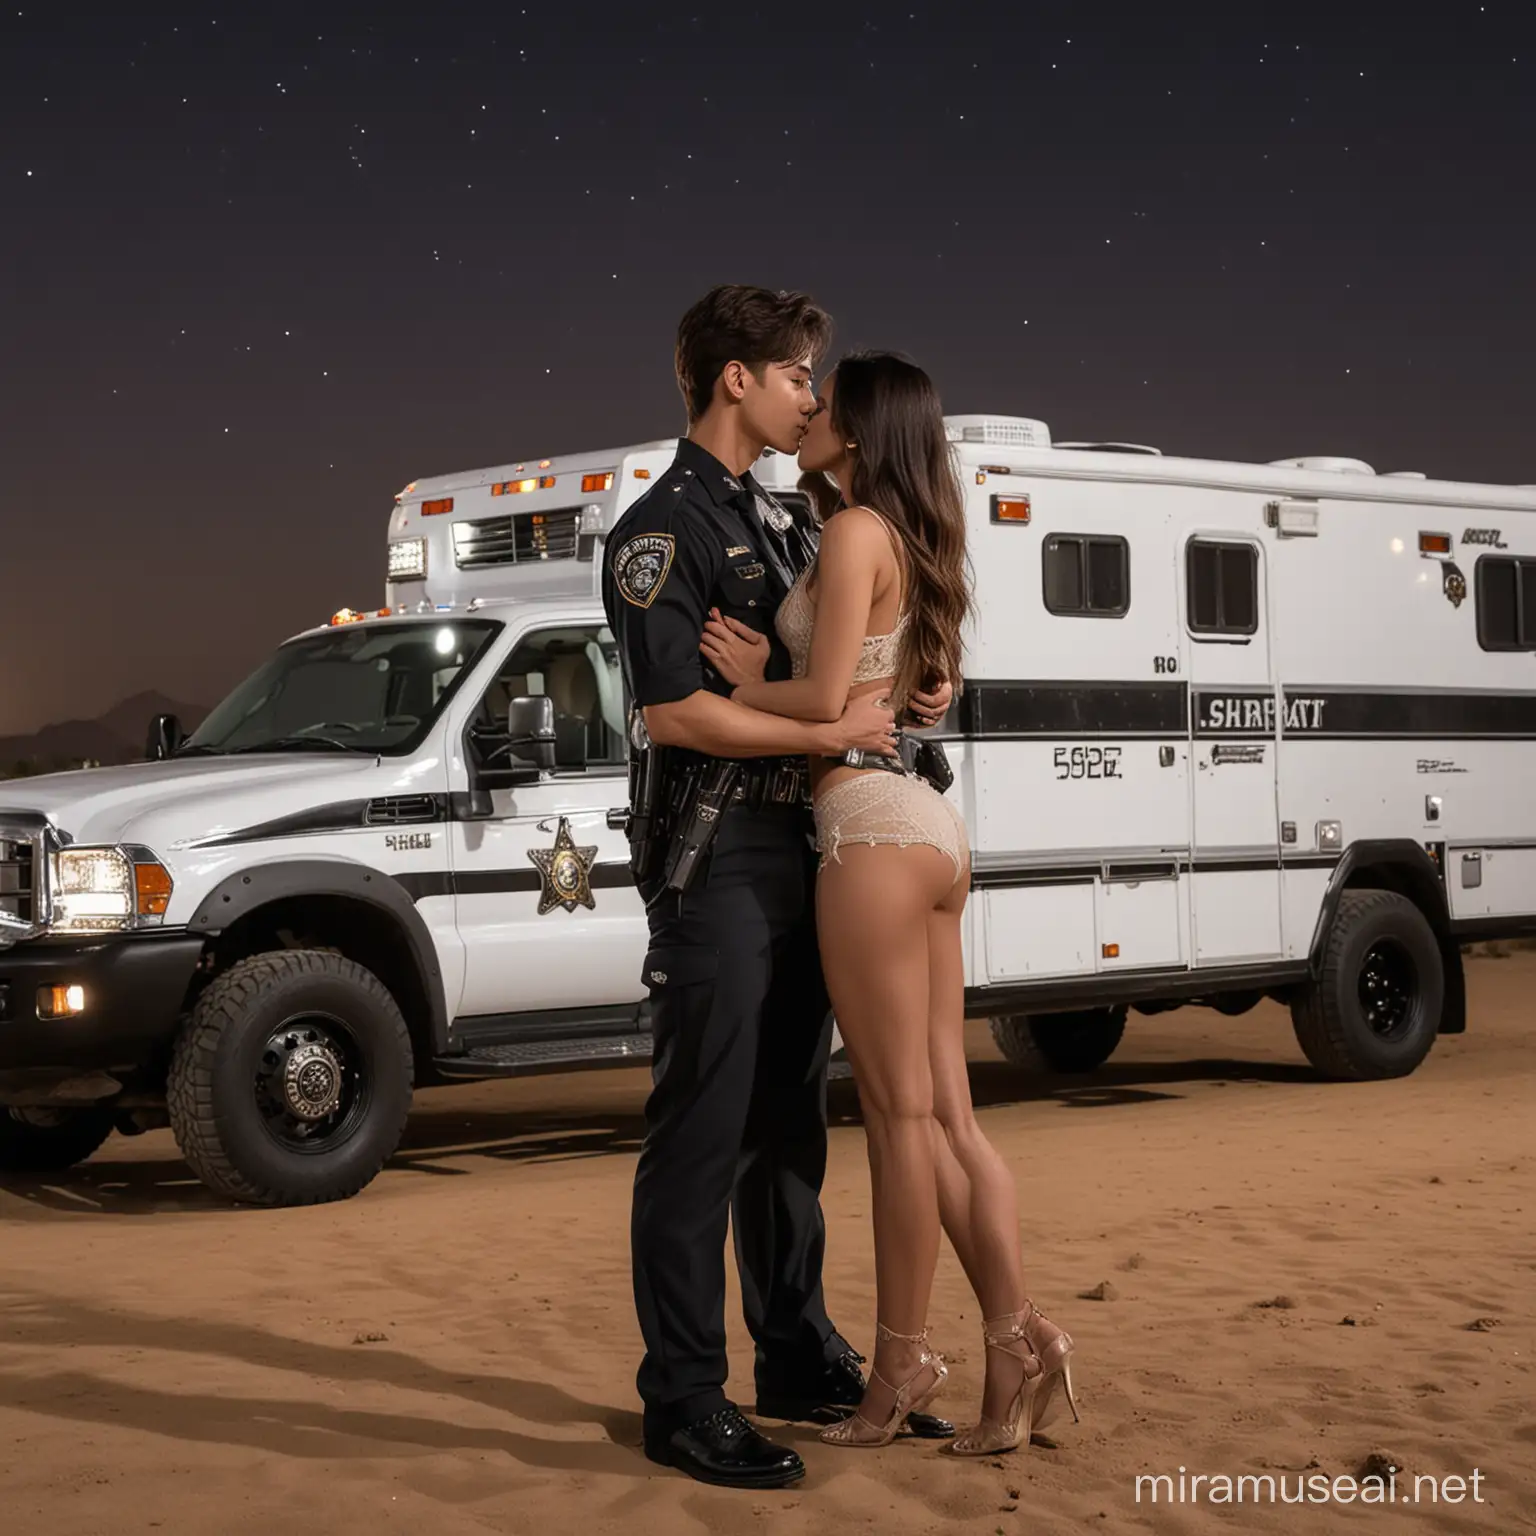 Tall muscular Kpop boy wearing LAPD uniform kiss and carry short Arab girl in Desert next to sheriff motor home at night